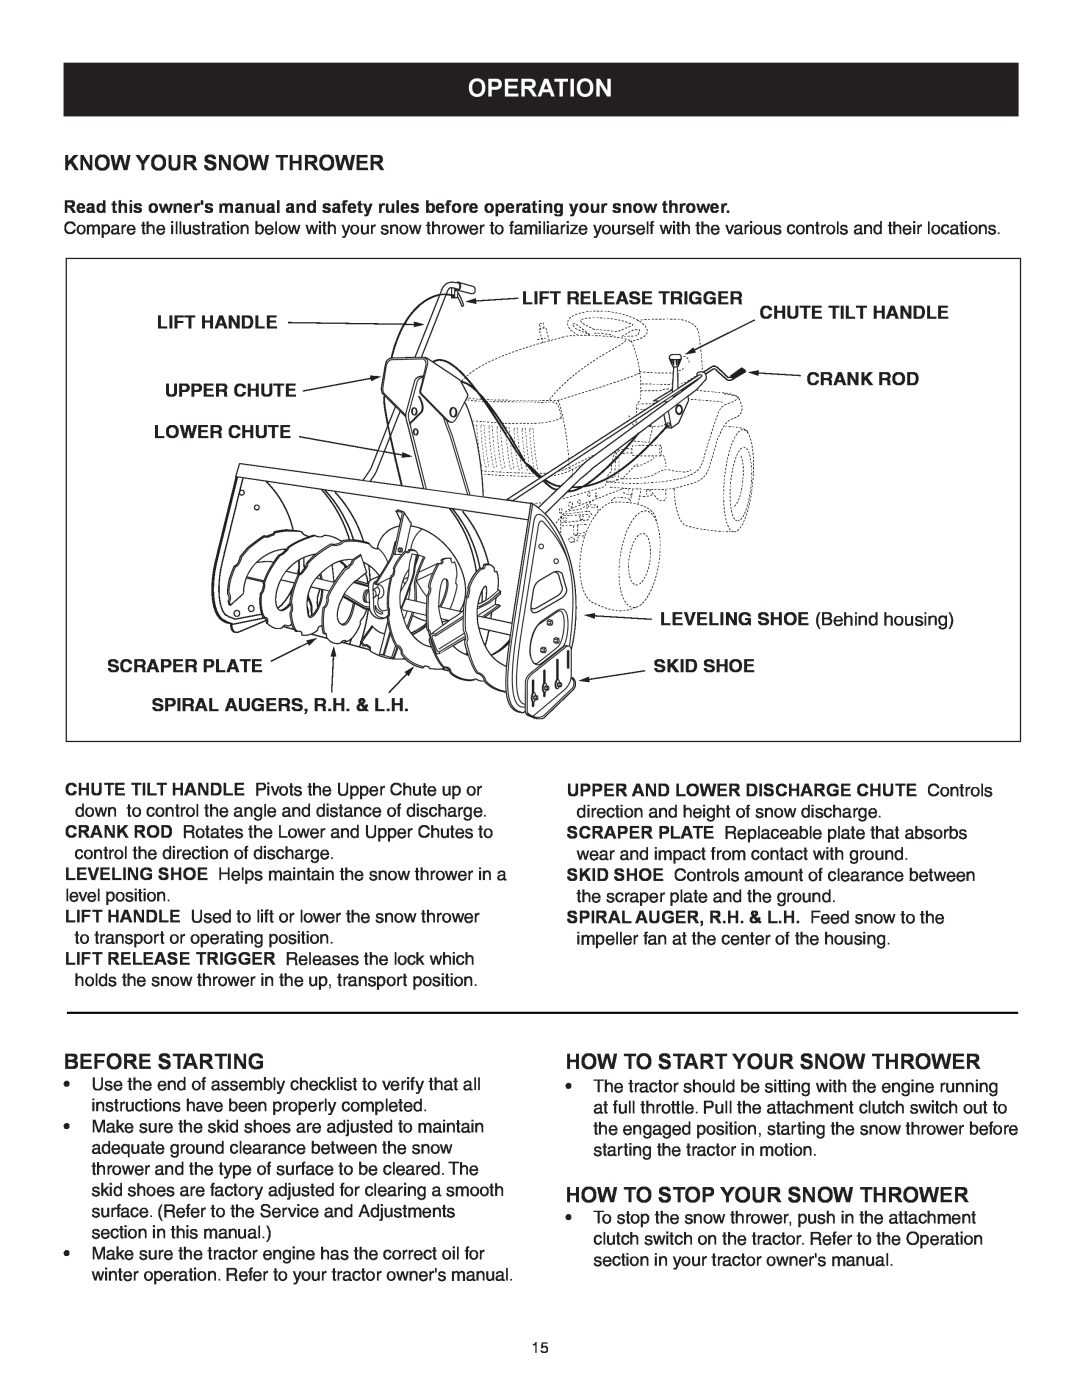 Sears 486.248463 Operation, Know Your Snow Thrower, Before Starting, How To Start Your Snow Thrower, Lift Release Trigger 